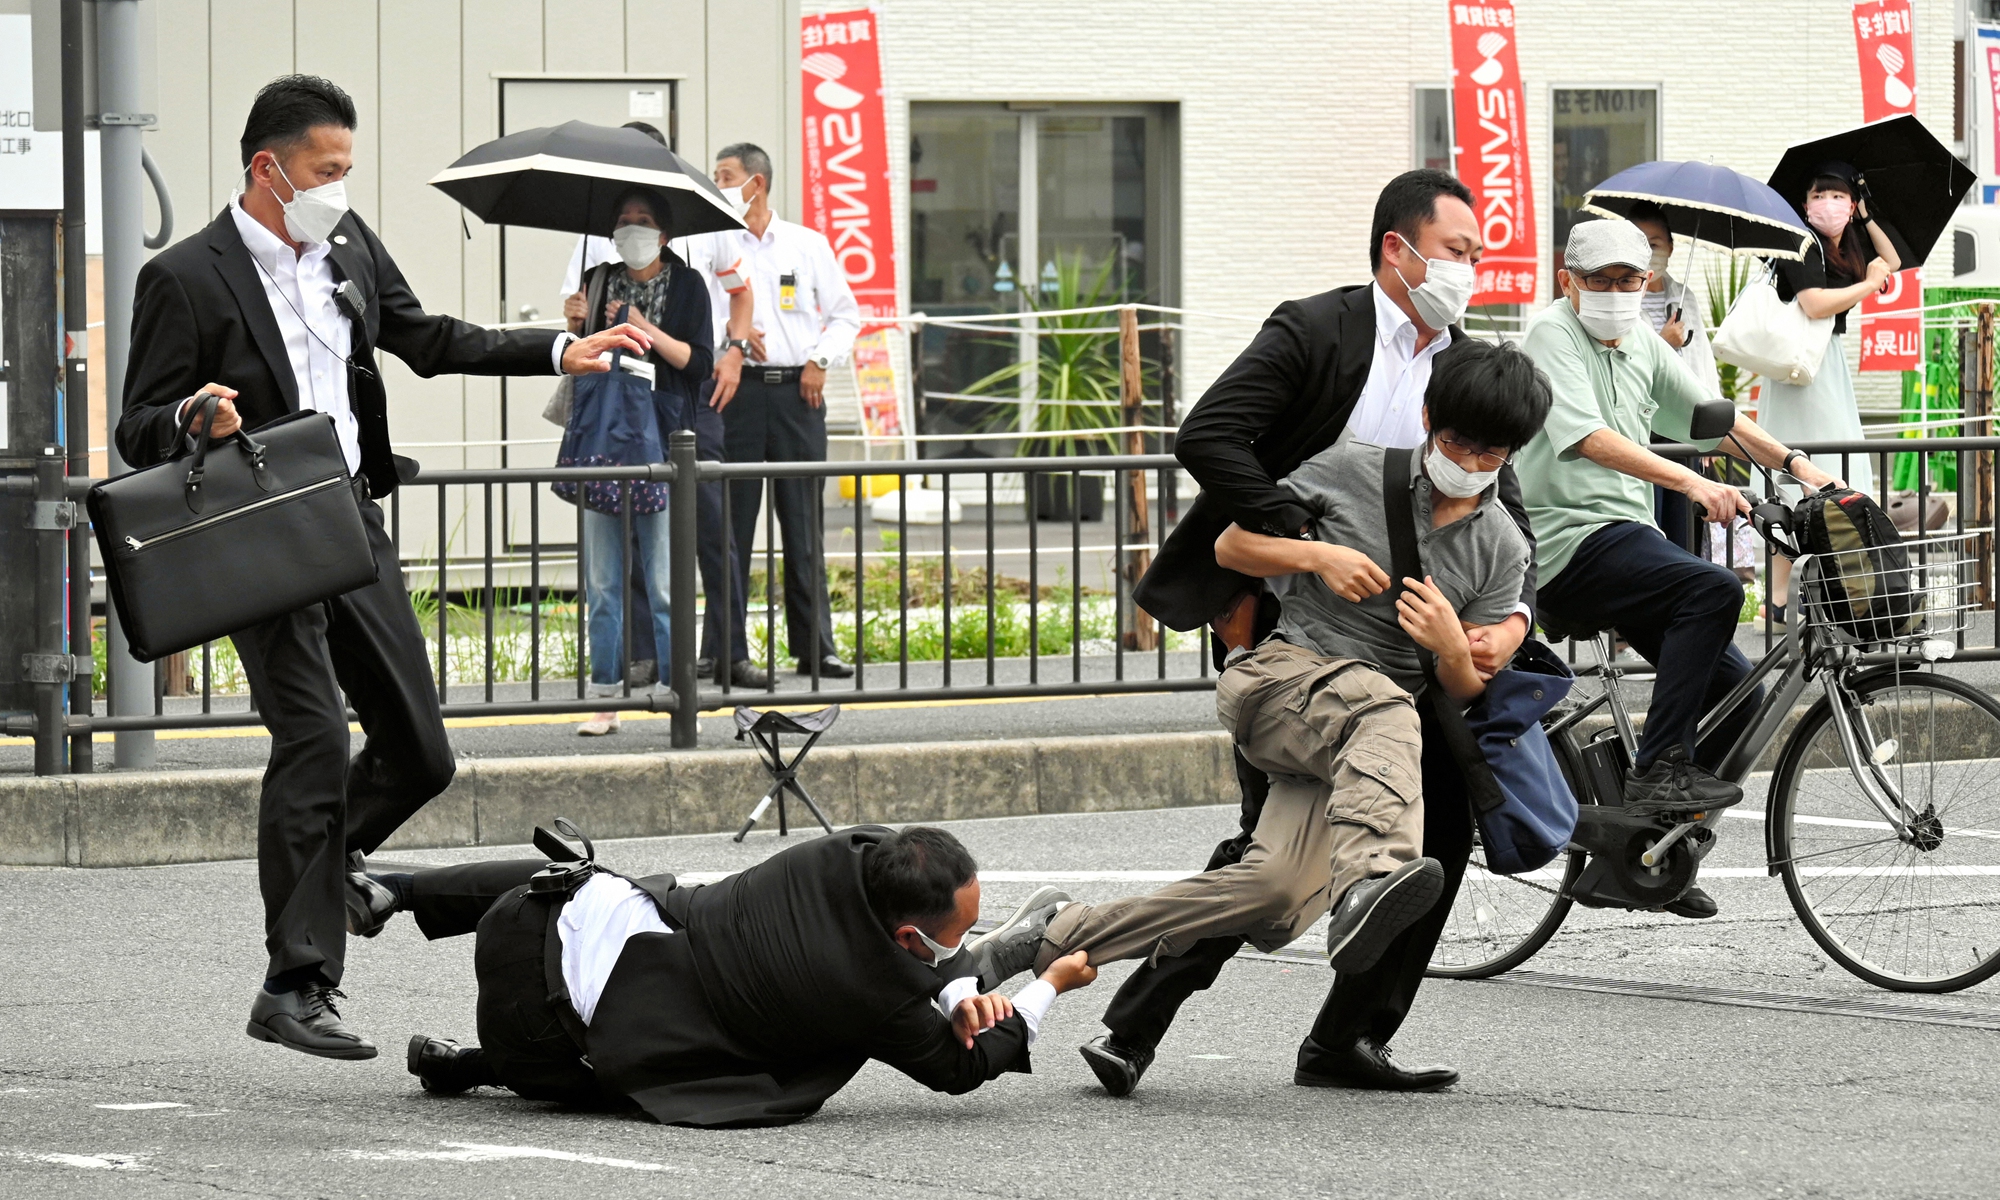 Security personnel tackle a suspect believed to have shot former prime minister Shinzo Abe on July 8, 2022 in Nara, Japan. Photo: VCG